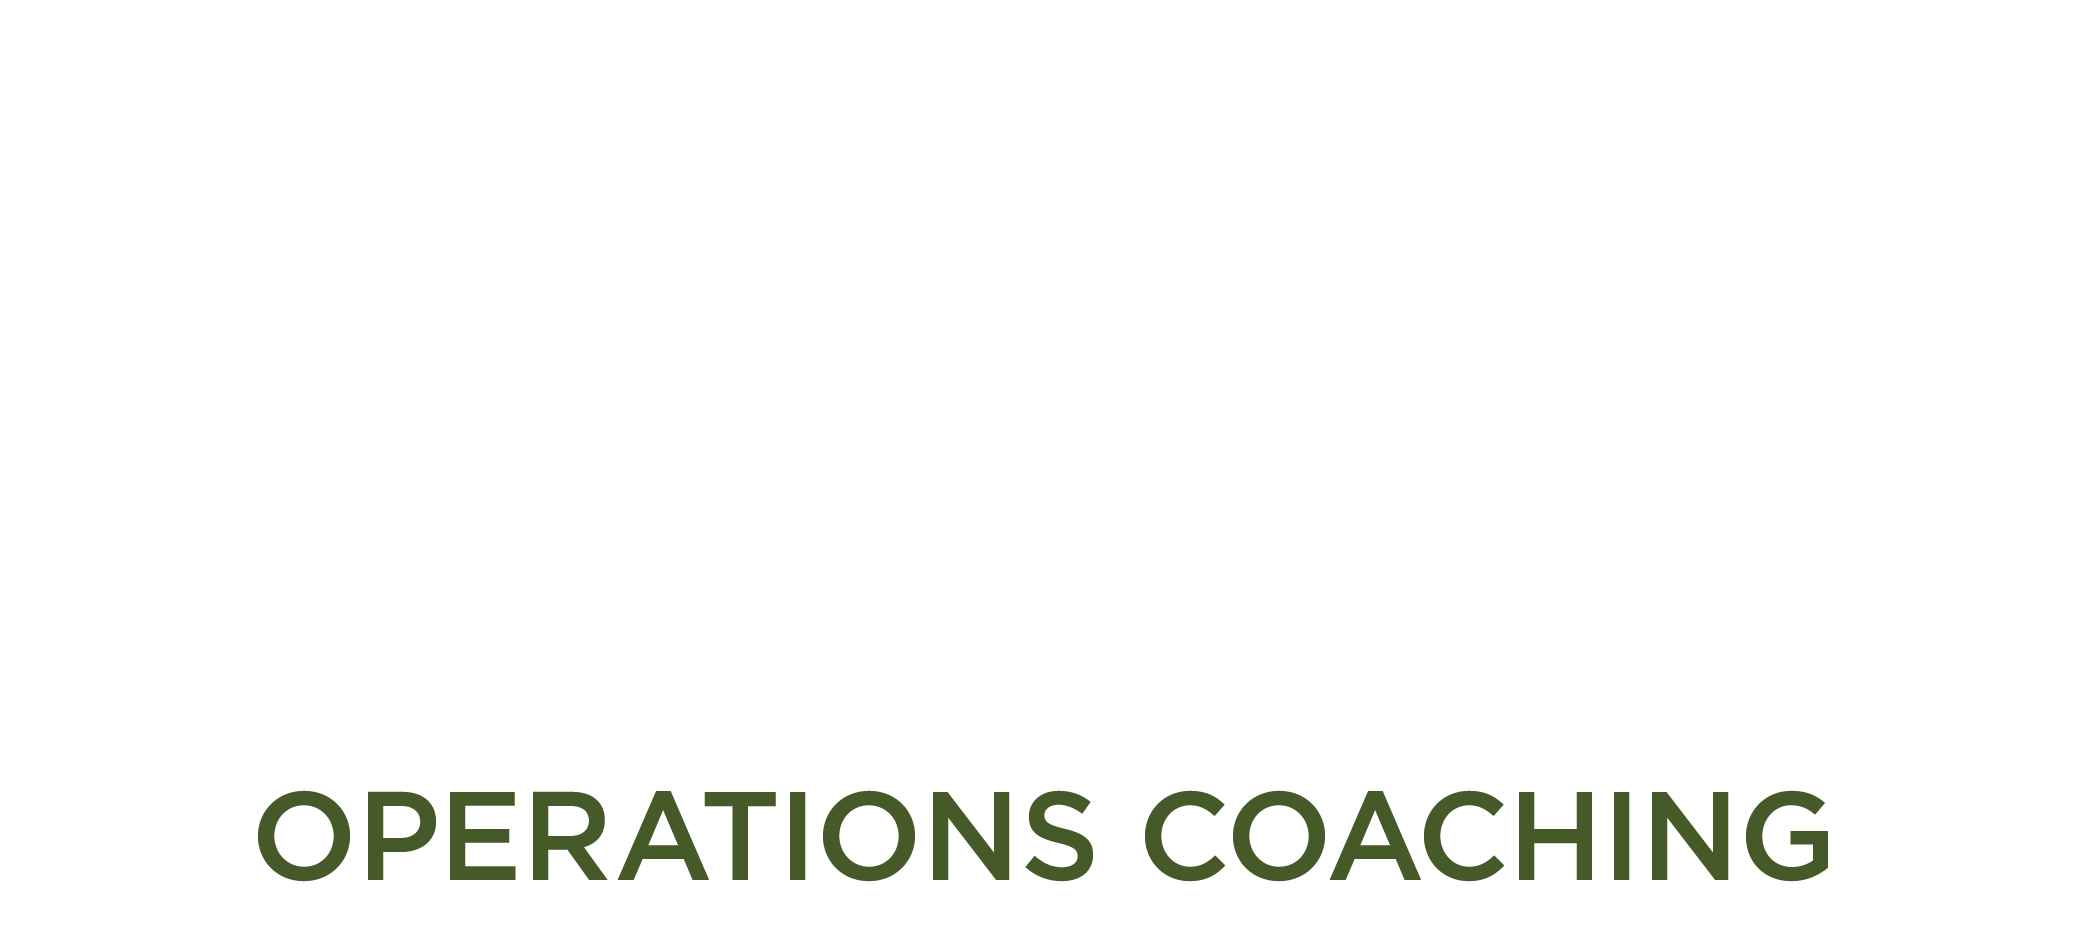 Amplified Solutions Coaching